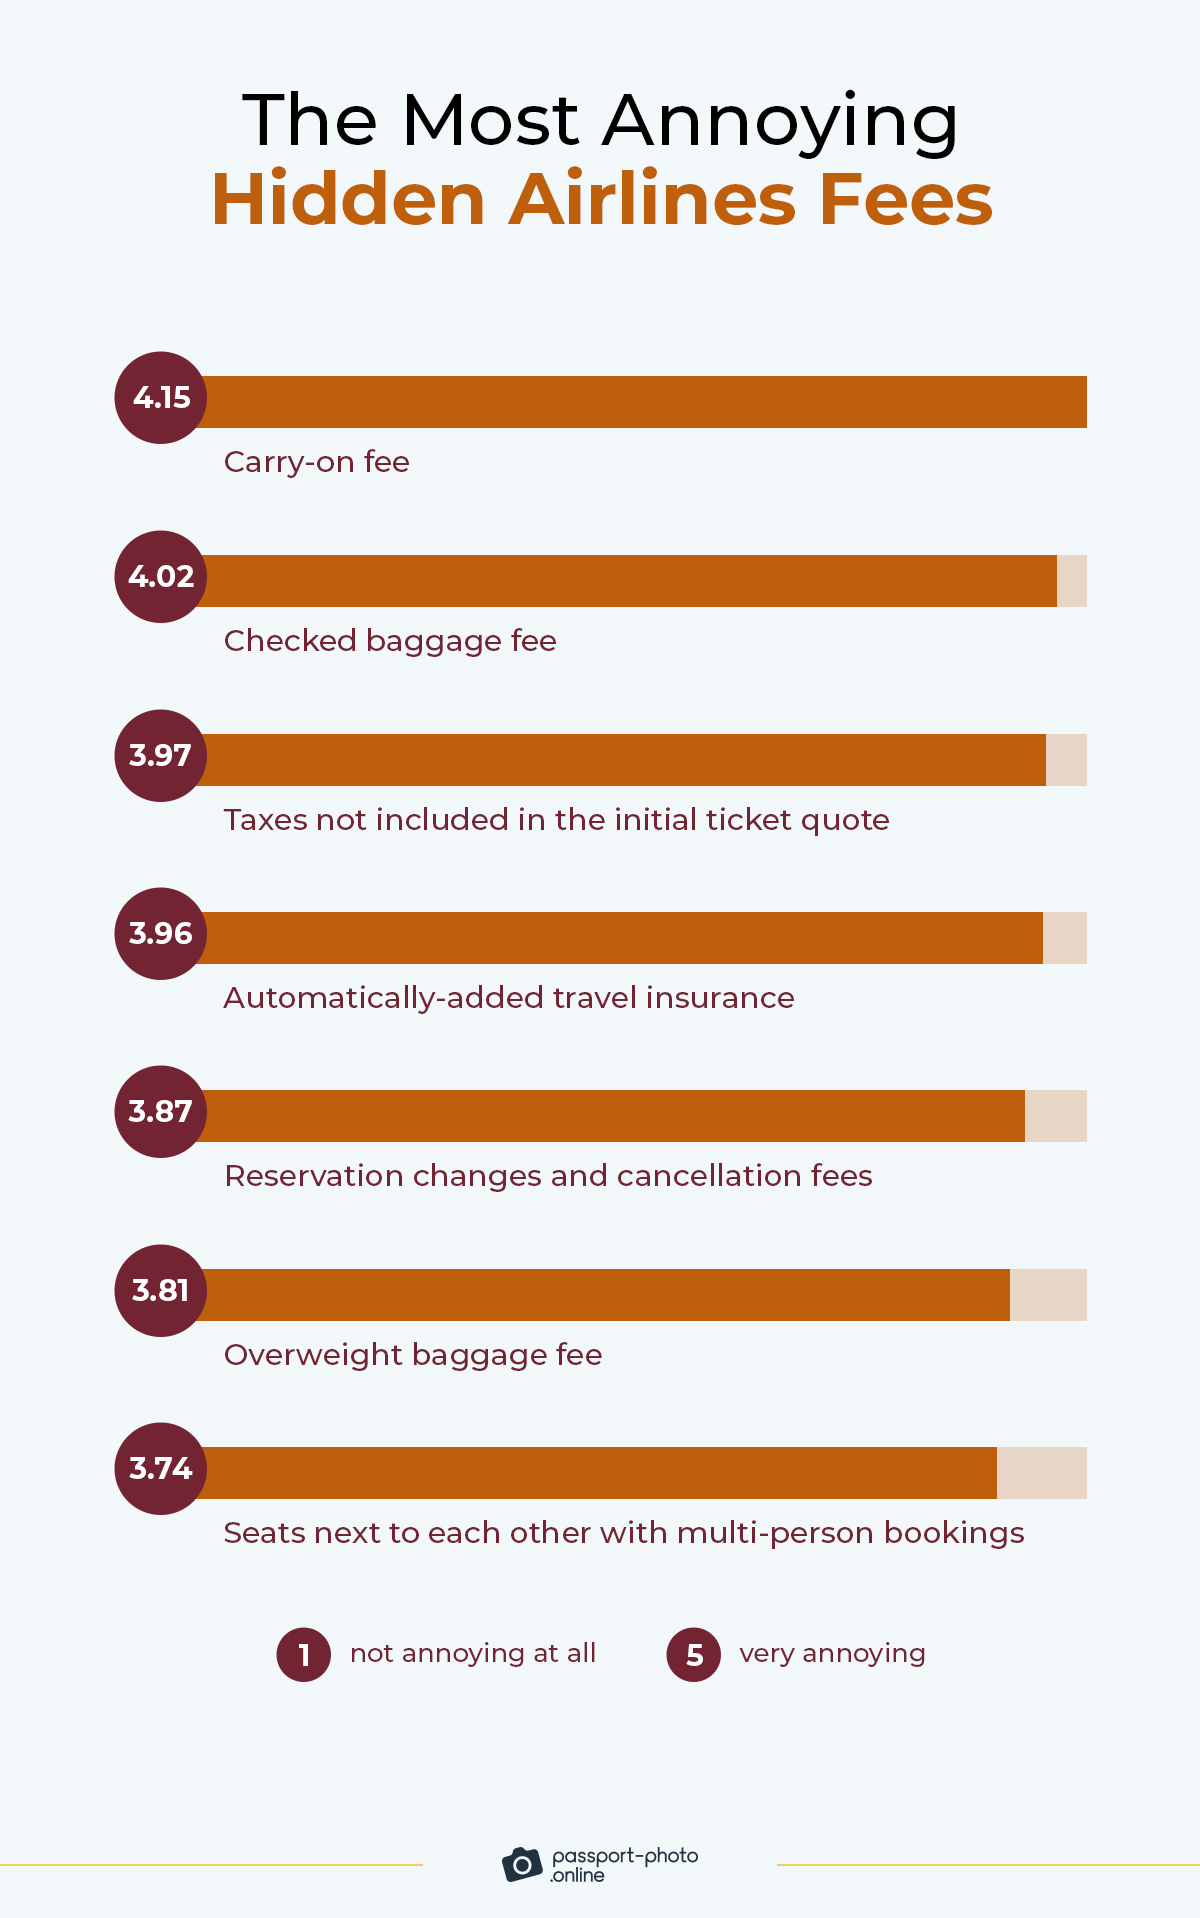 The top three most annoying fees are: carry-on baggage fee (78%%), checked baggage fee (76%), and net prices (72%)